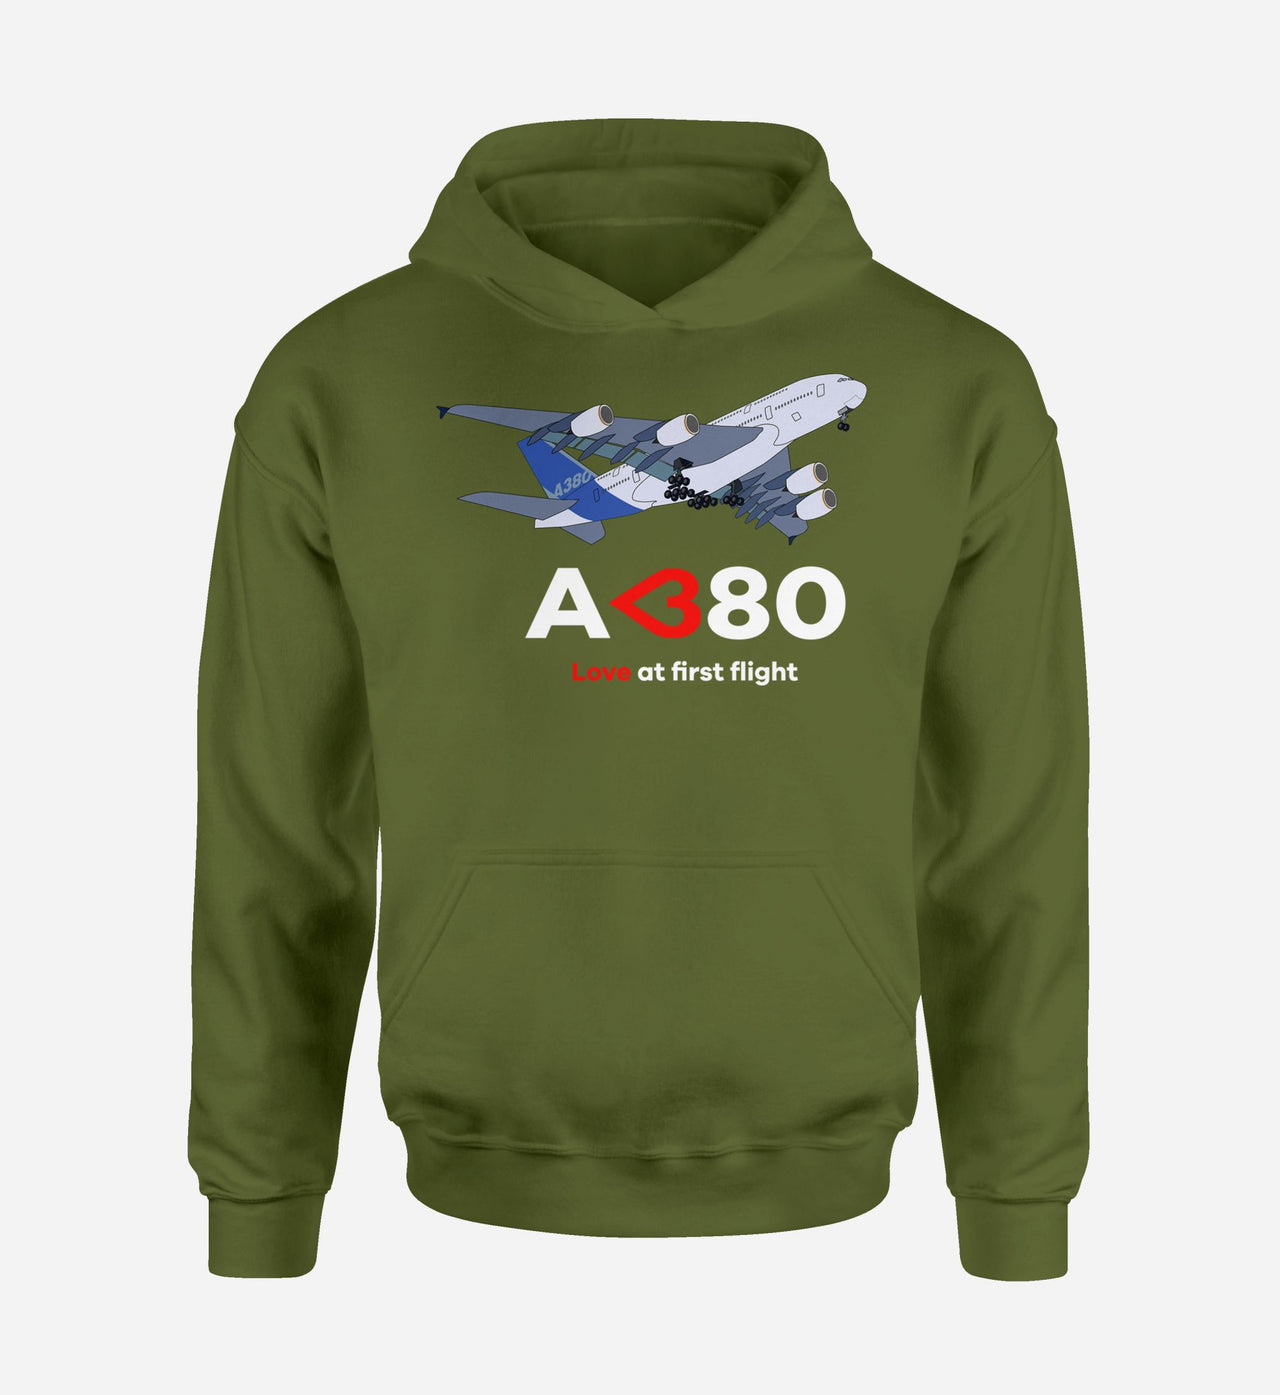 Airbus A380 Love at first flight Designed Hoodies